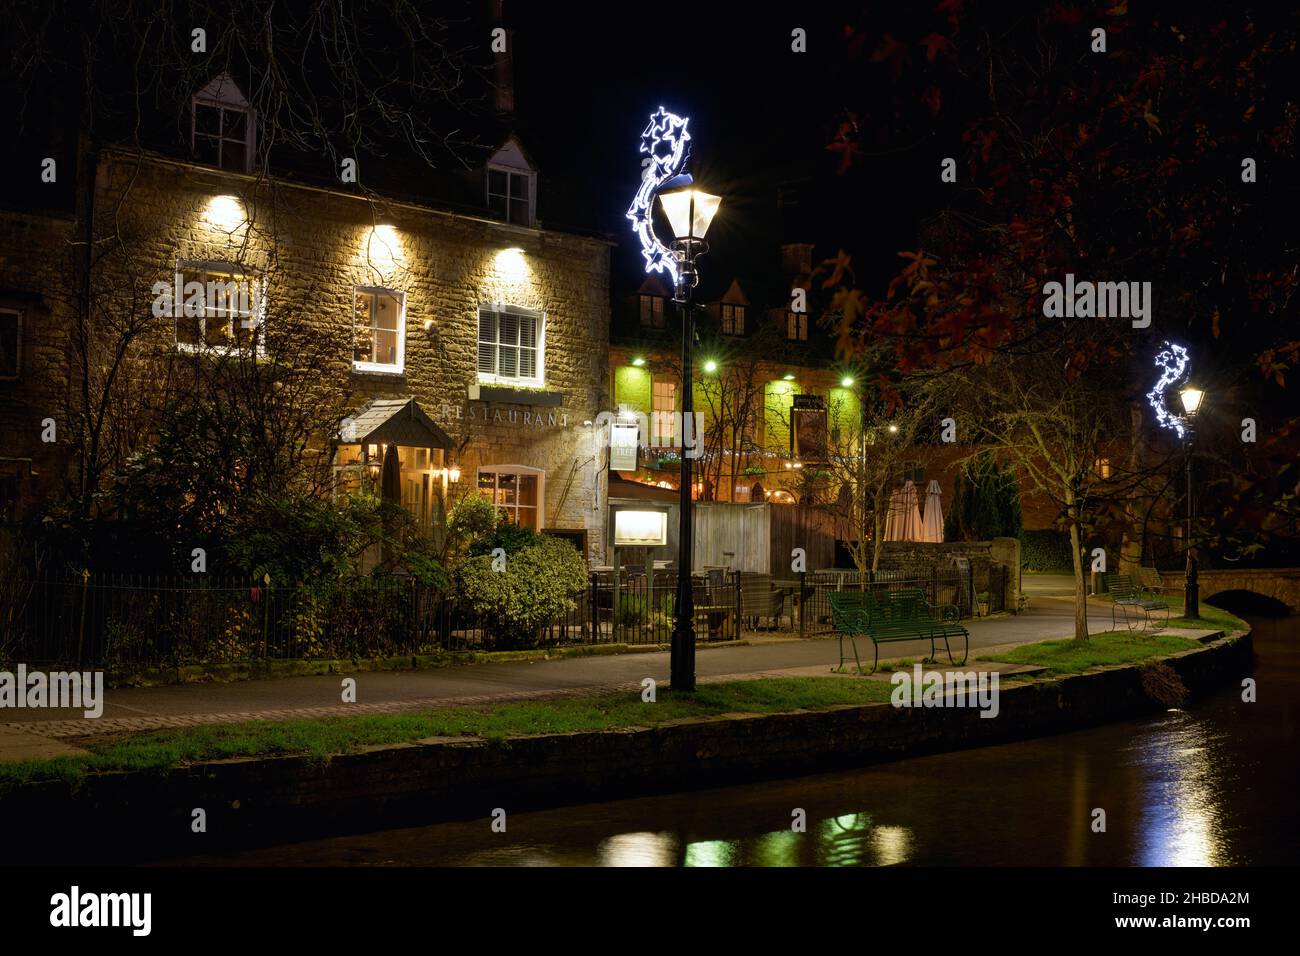 The Rose Tree restaurant at night at christmas. Bourton on the Water, Cotswolds, Gloucestershire, England Stock Photo